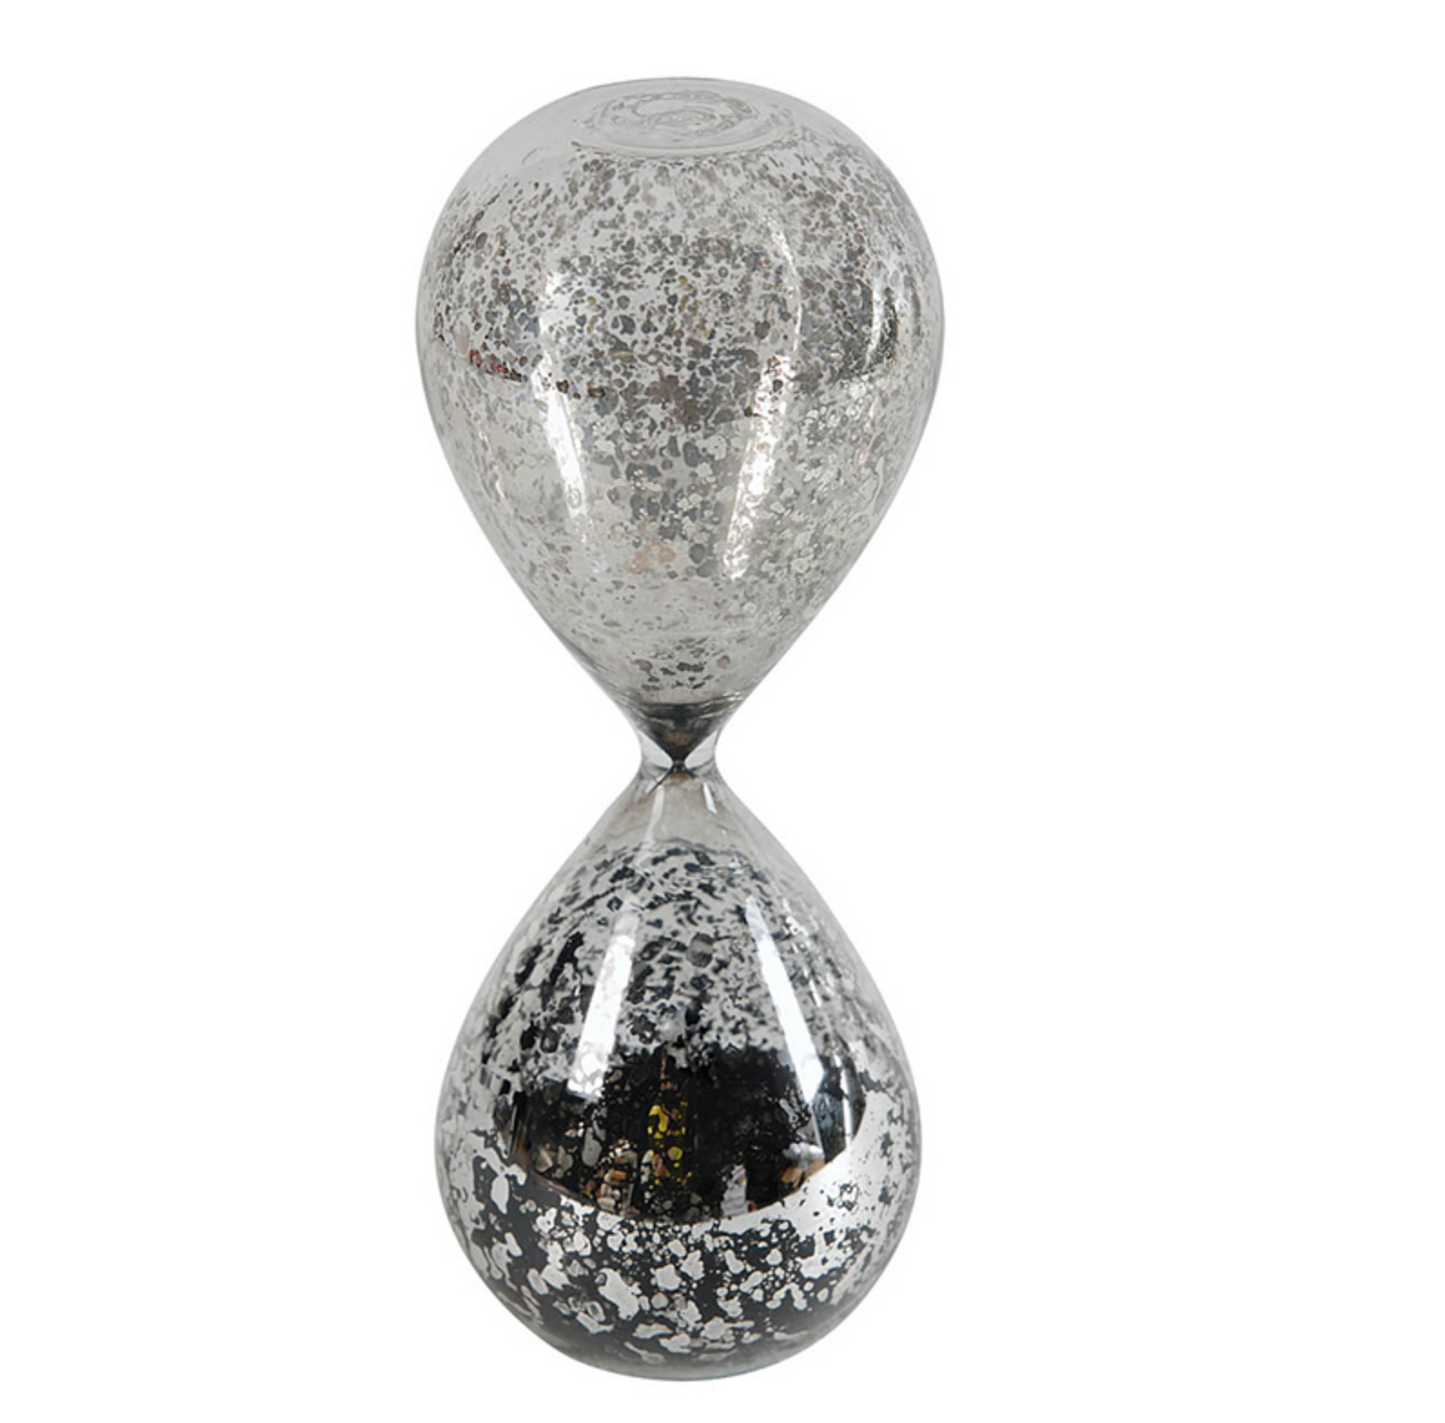 30-Minute Silvered Hourglass with Black Sand